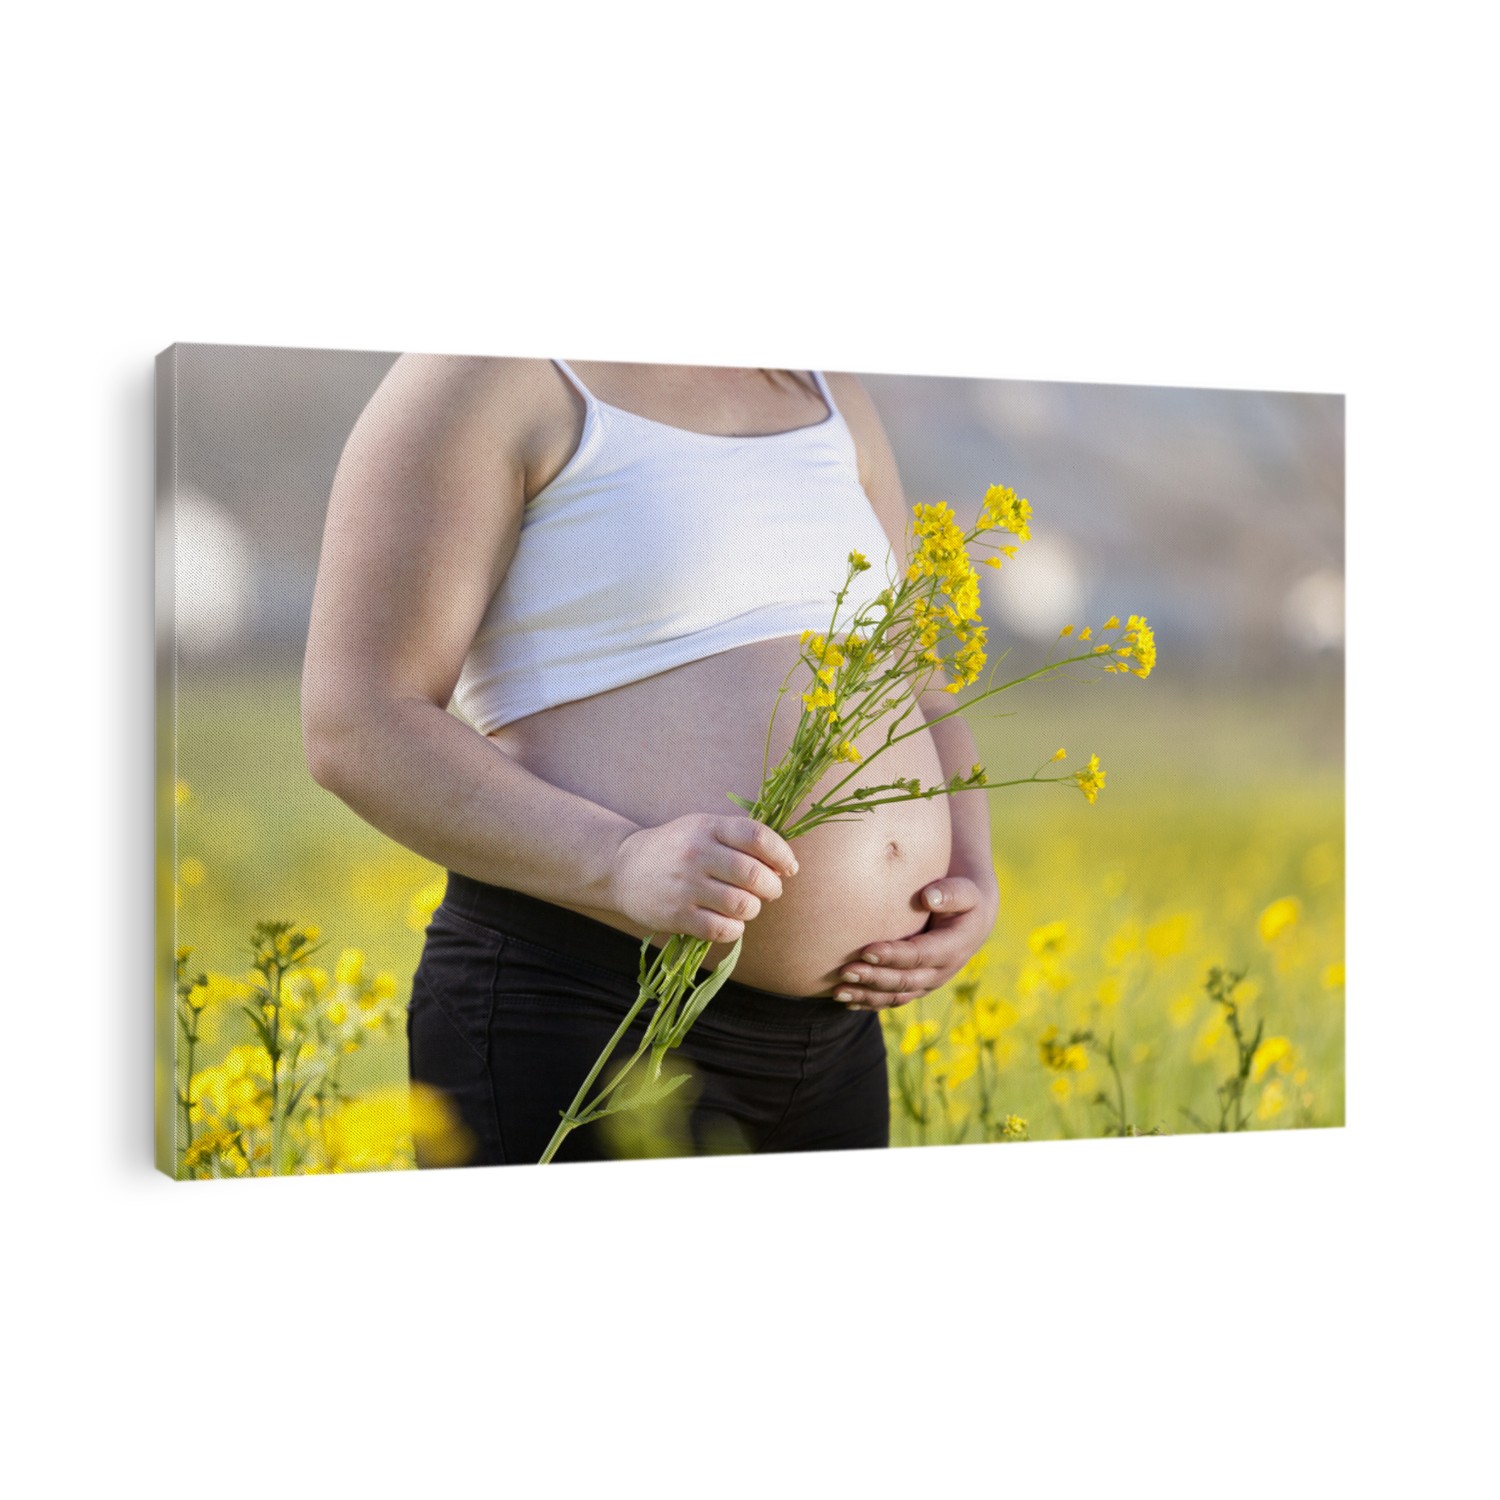 Pregnant woman holding wildflowers at the park